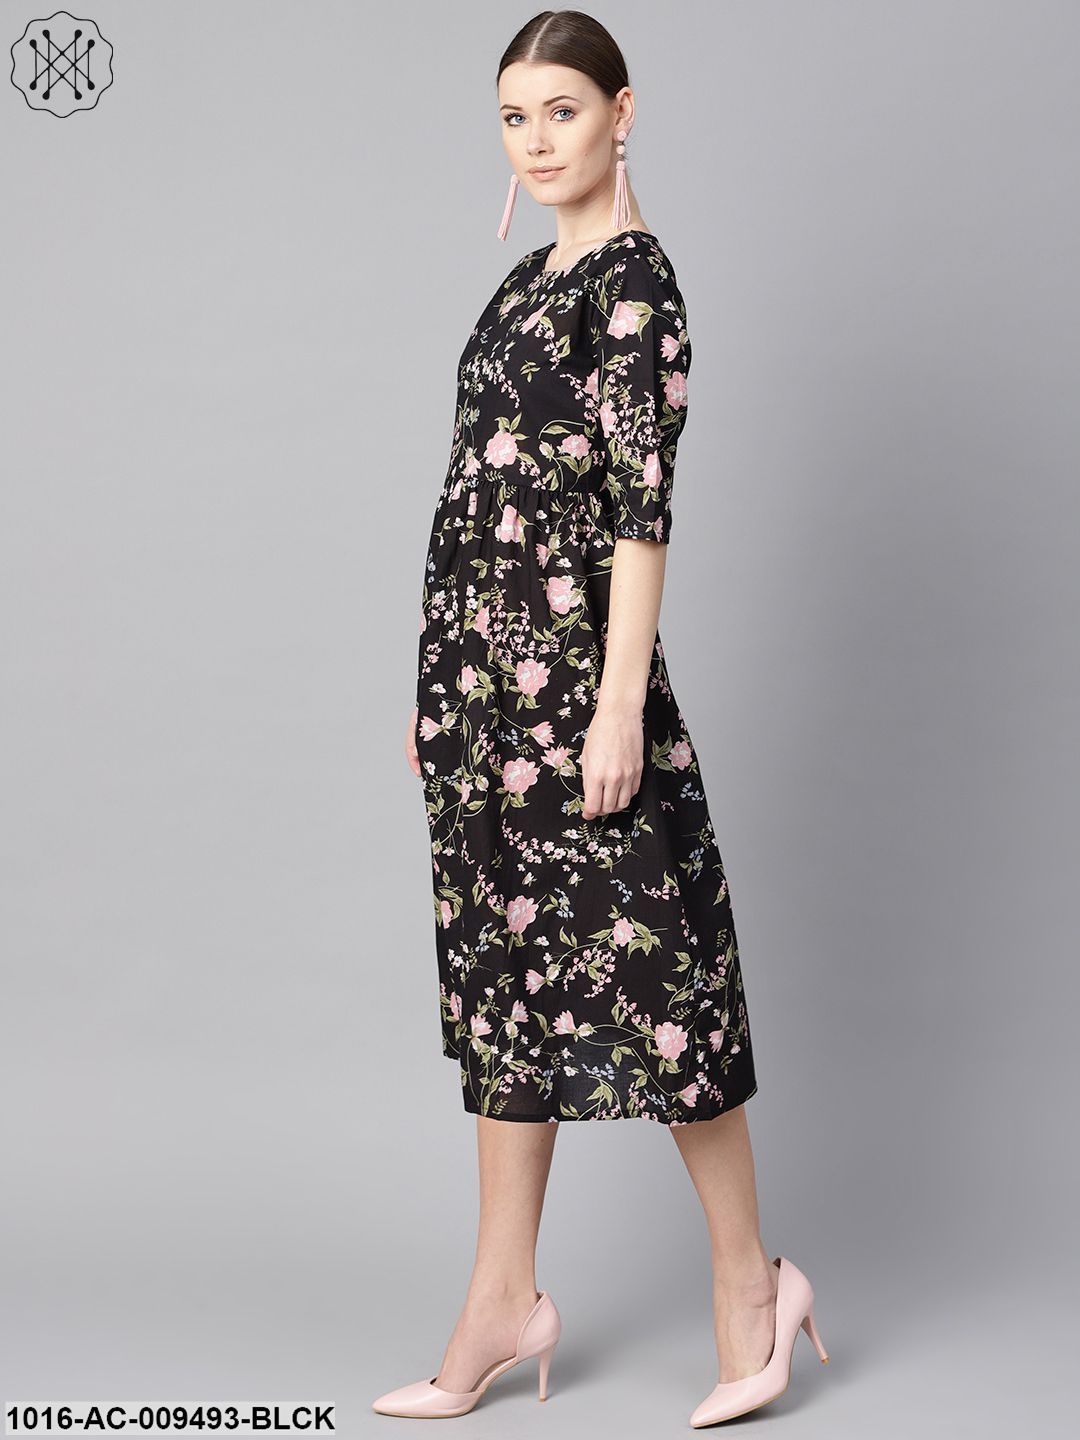 Black Floral Dress With Round Neck & Half Sleeves